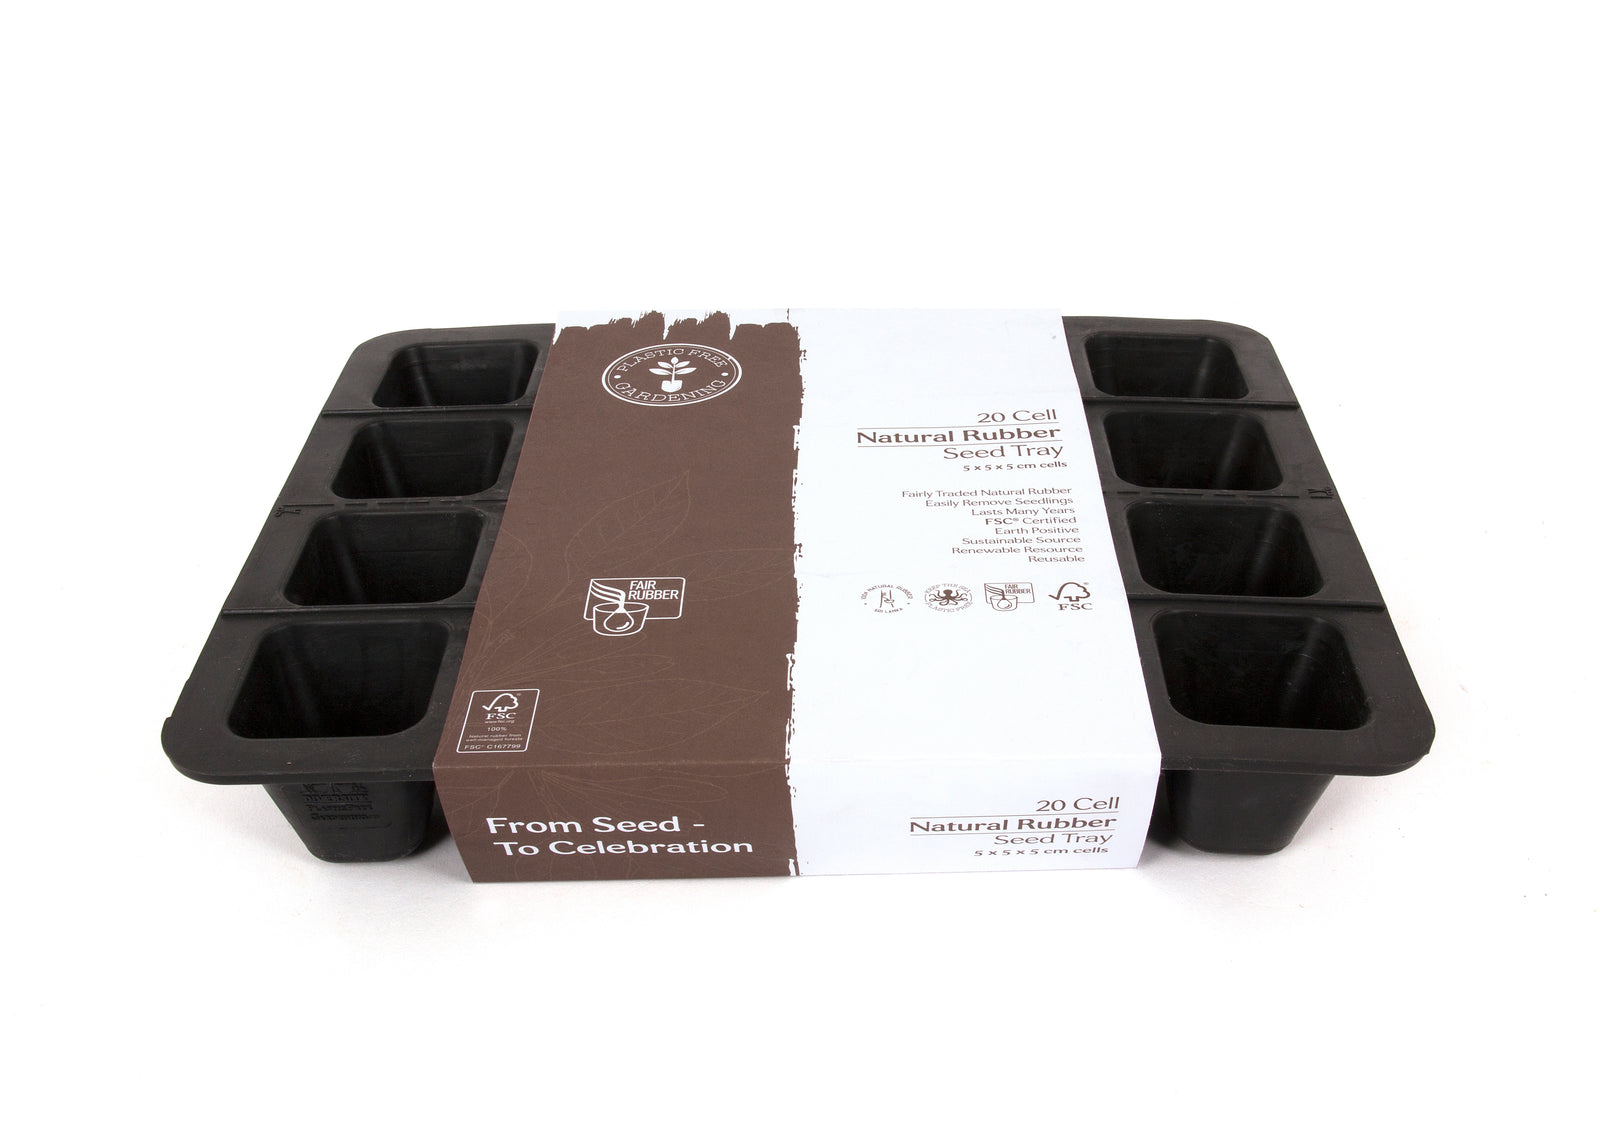 Natural Rubber Seed Tray with 20 Cells